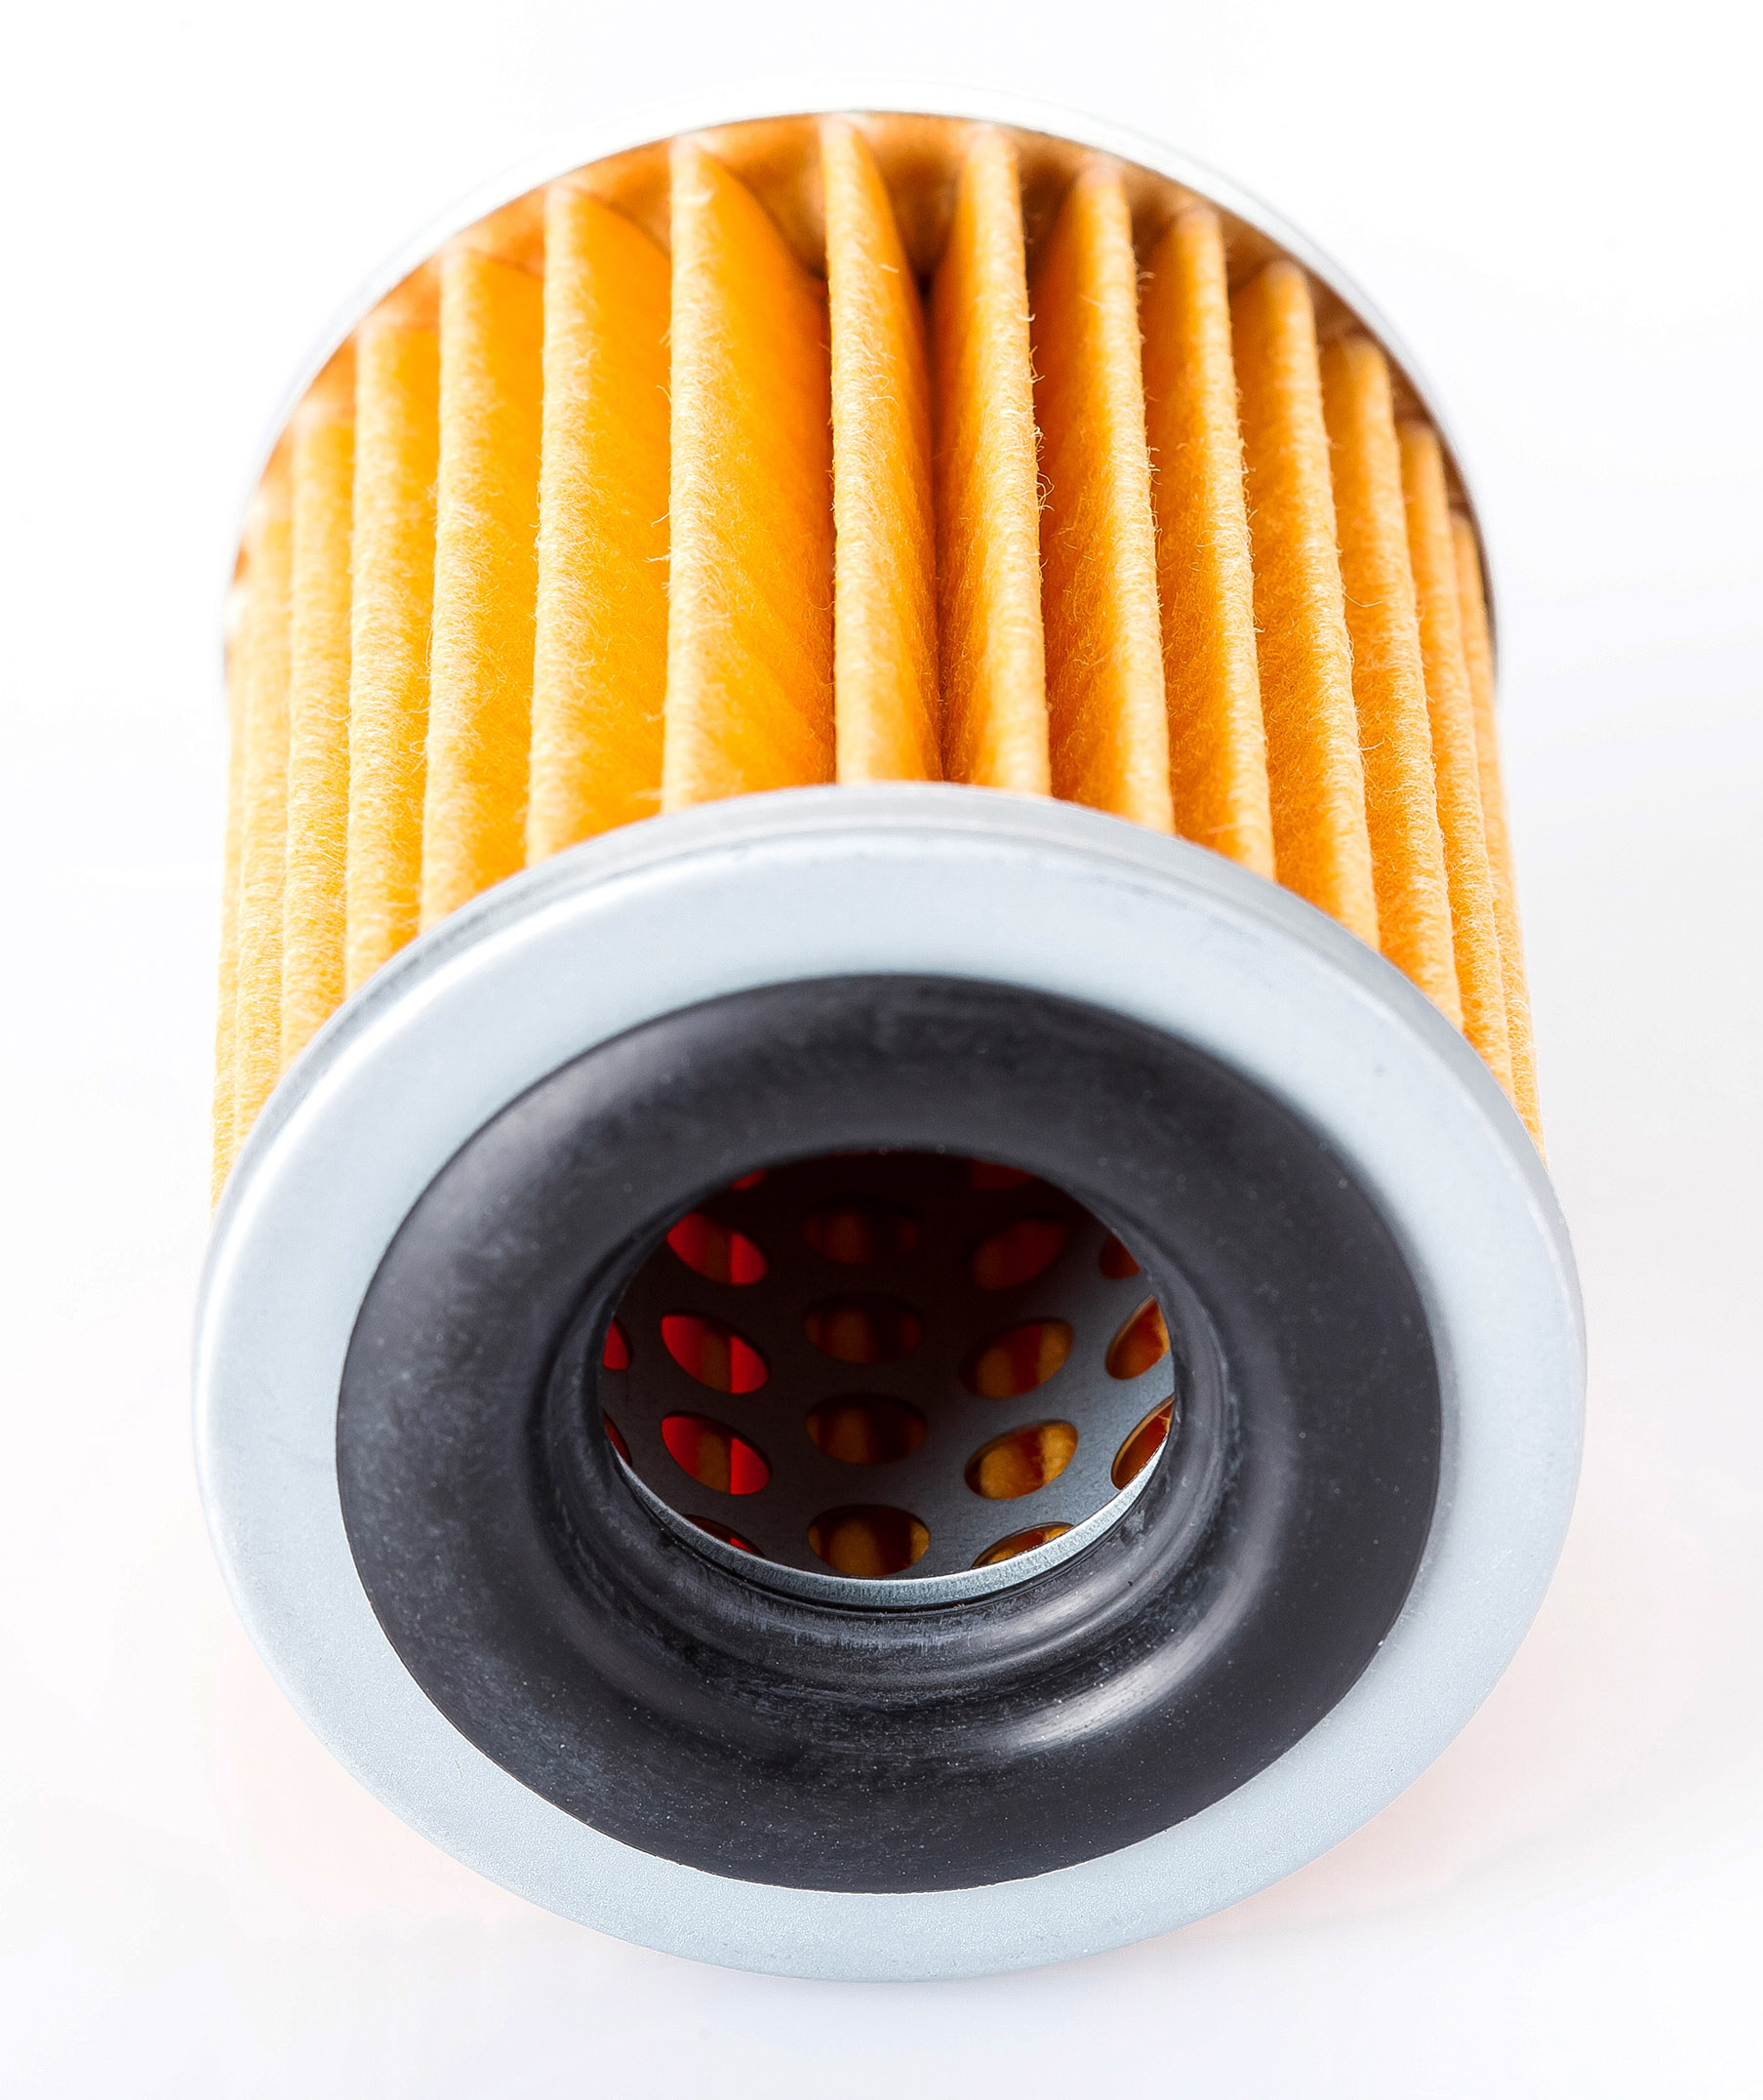 Zeotherm TPVs can be used in under-the-hood automotive parts such as this oil filter gasket.